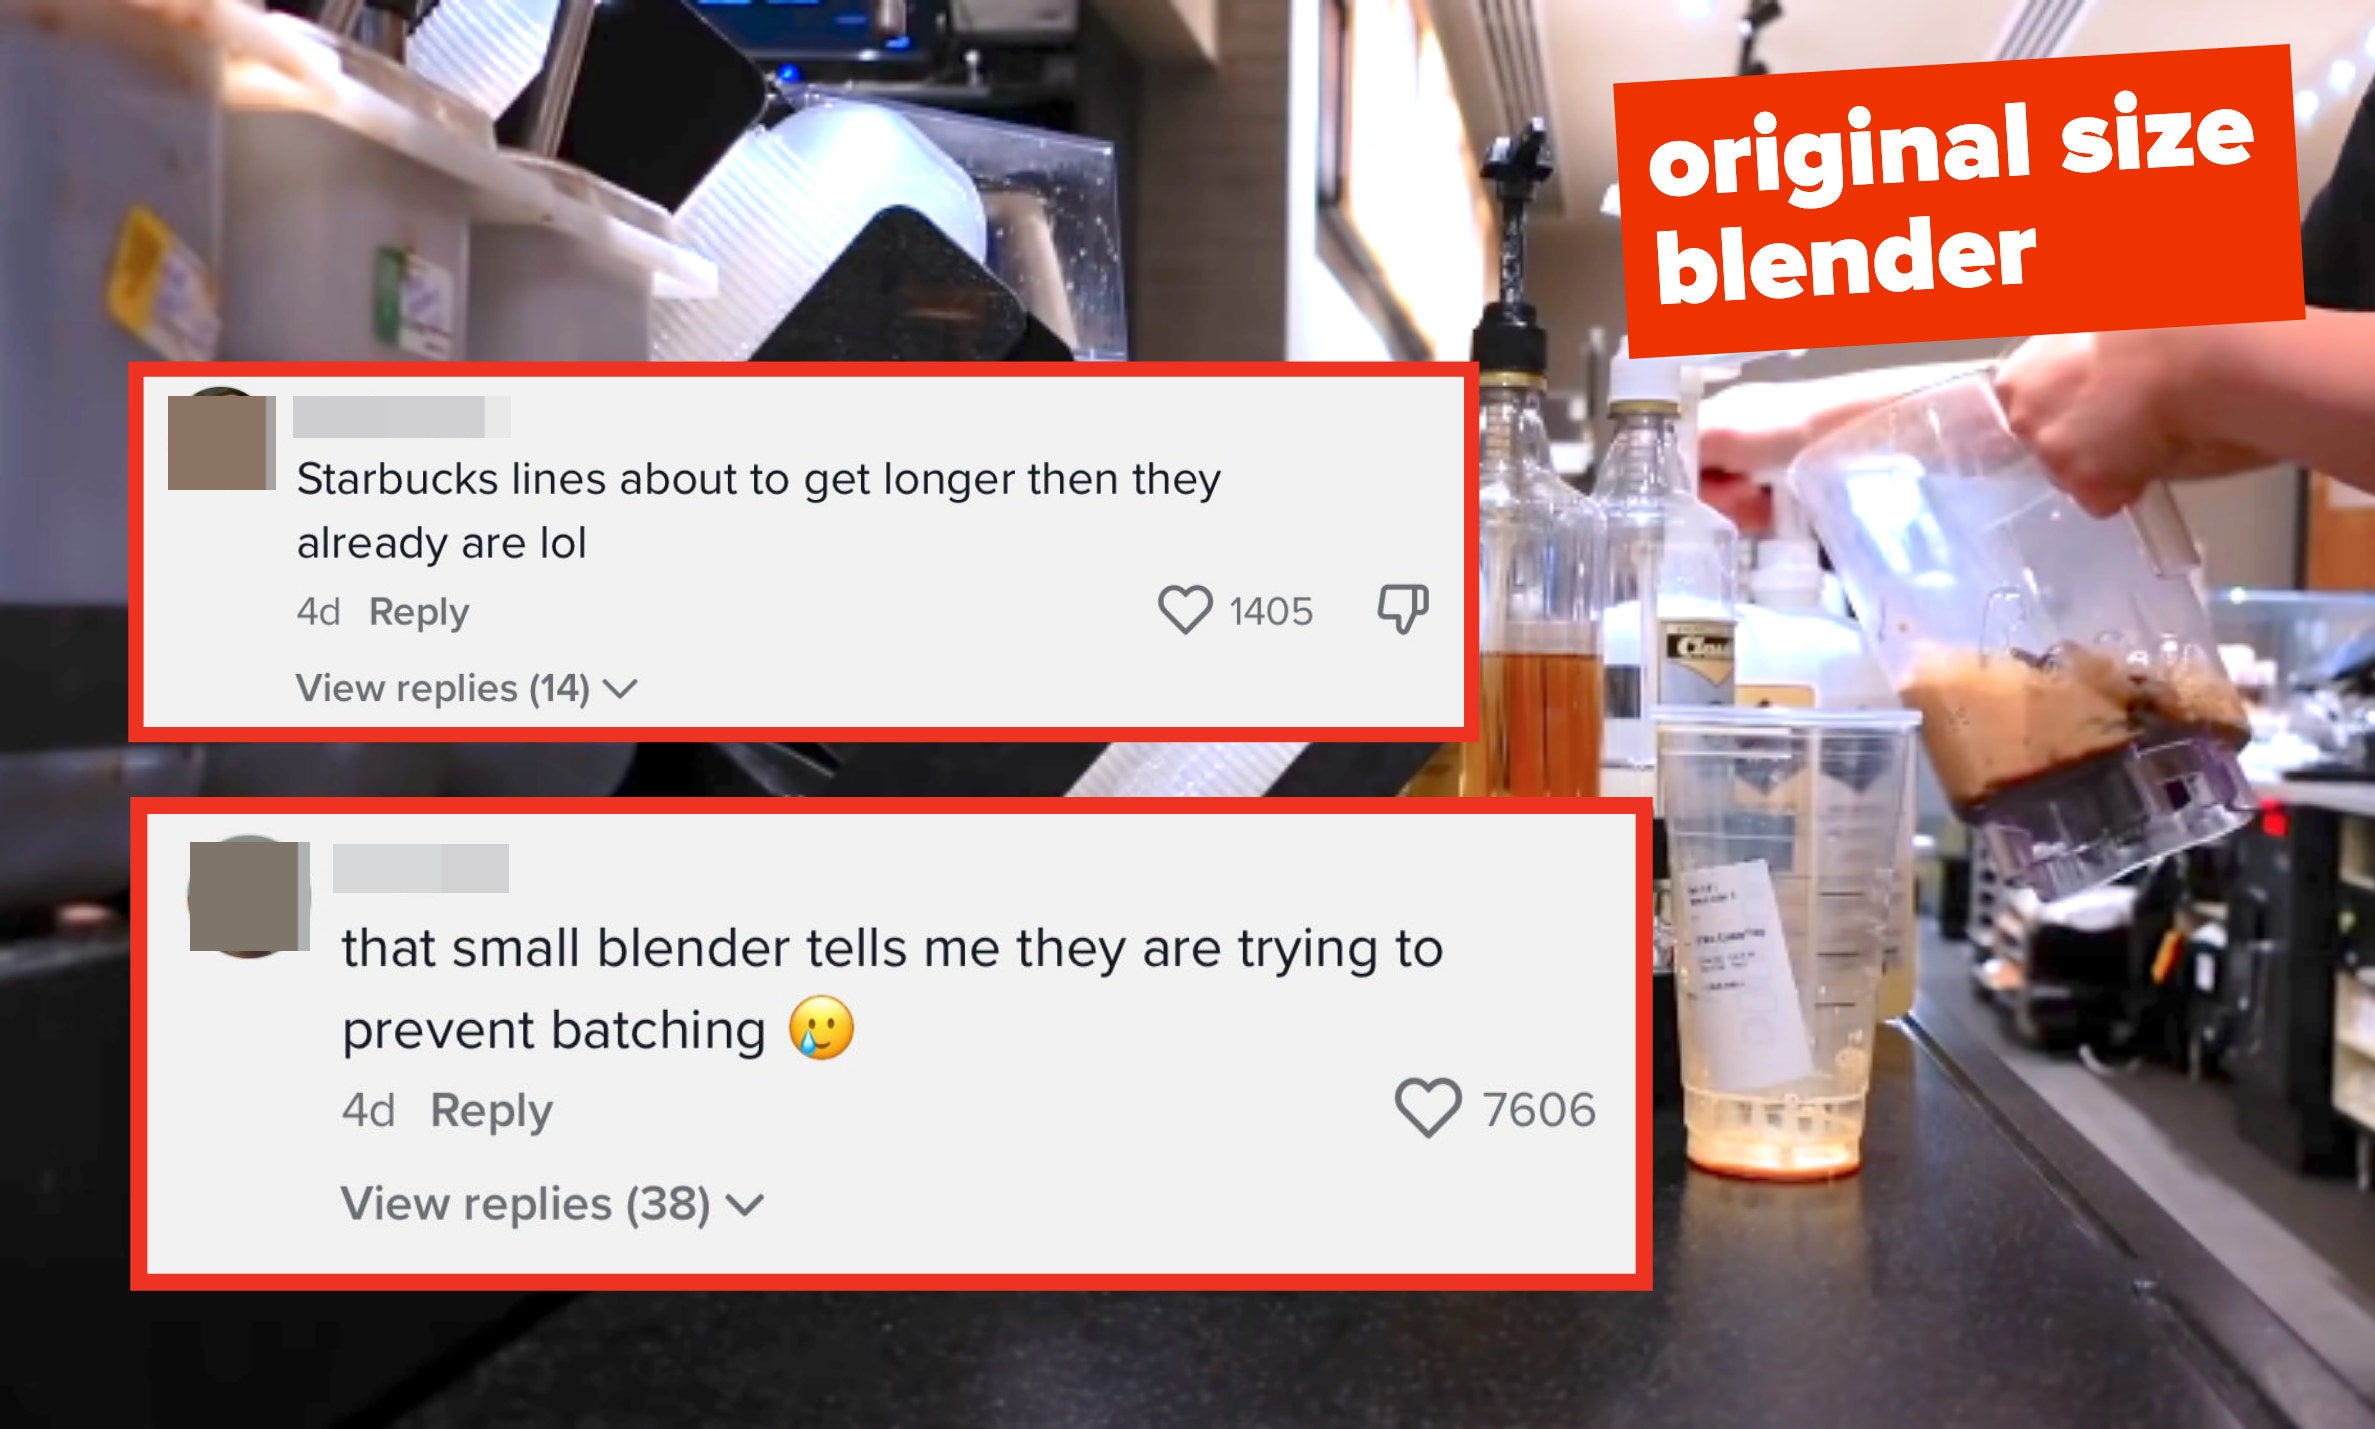 comments saying that lines are about to get longer, and they&#x27;re preventing batching, while pointing out large size of original blender